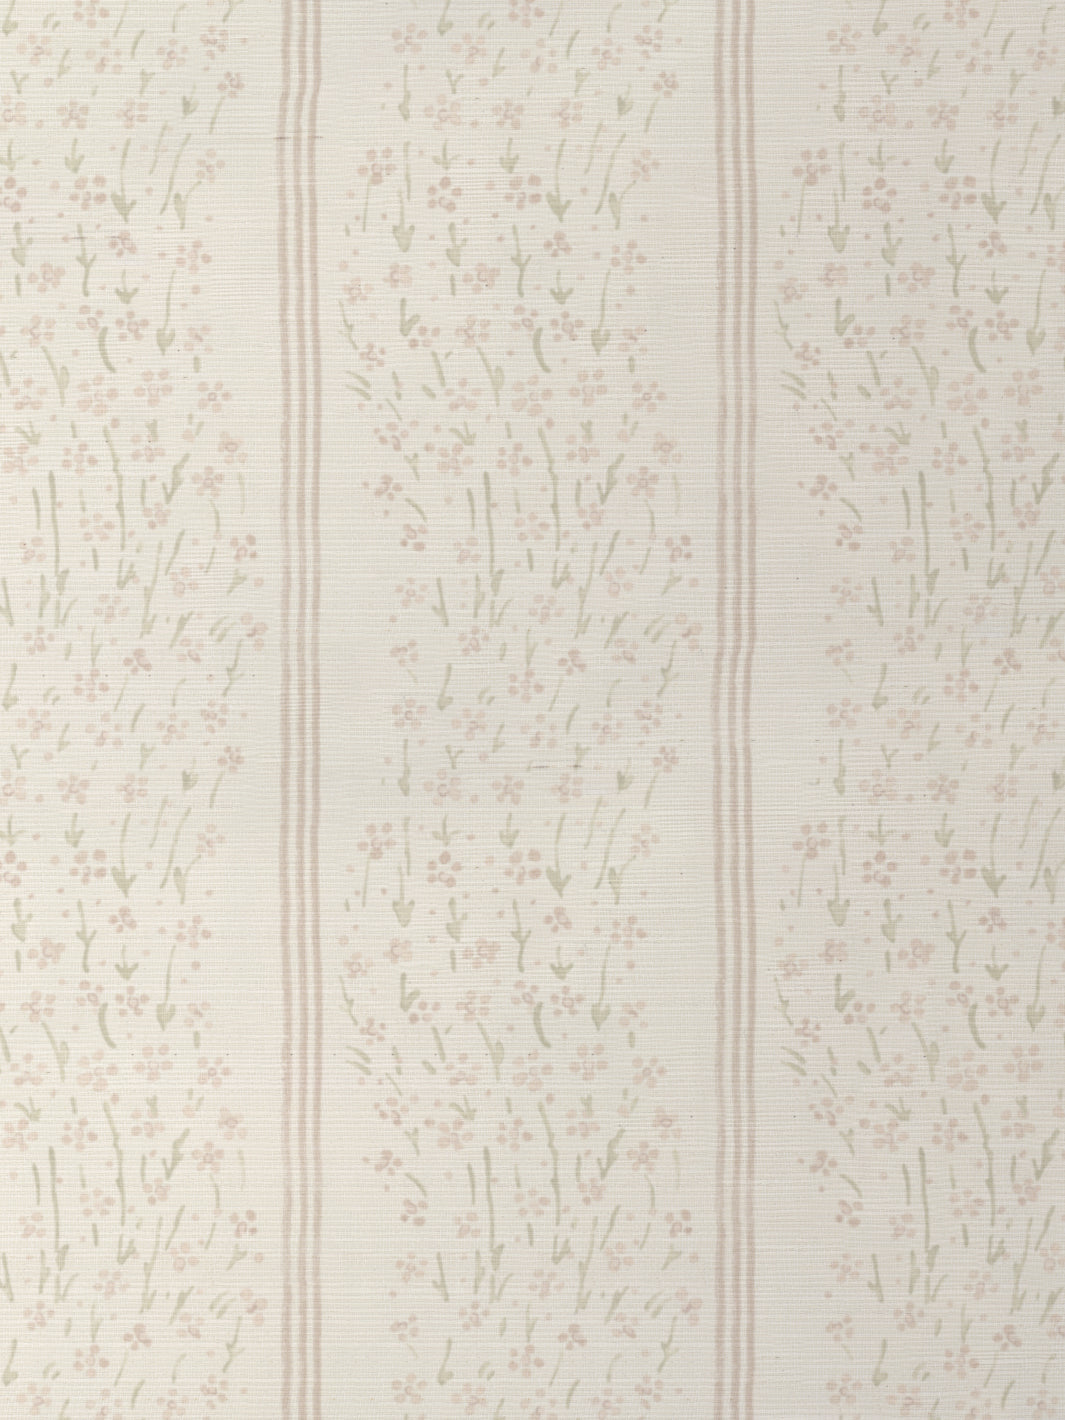 'Hillhouse Floral Ditsy Wave Stripe' Grasscloth Wallpaper by Nathan Turner - Pink Green